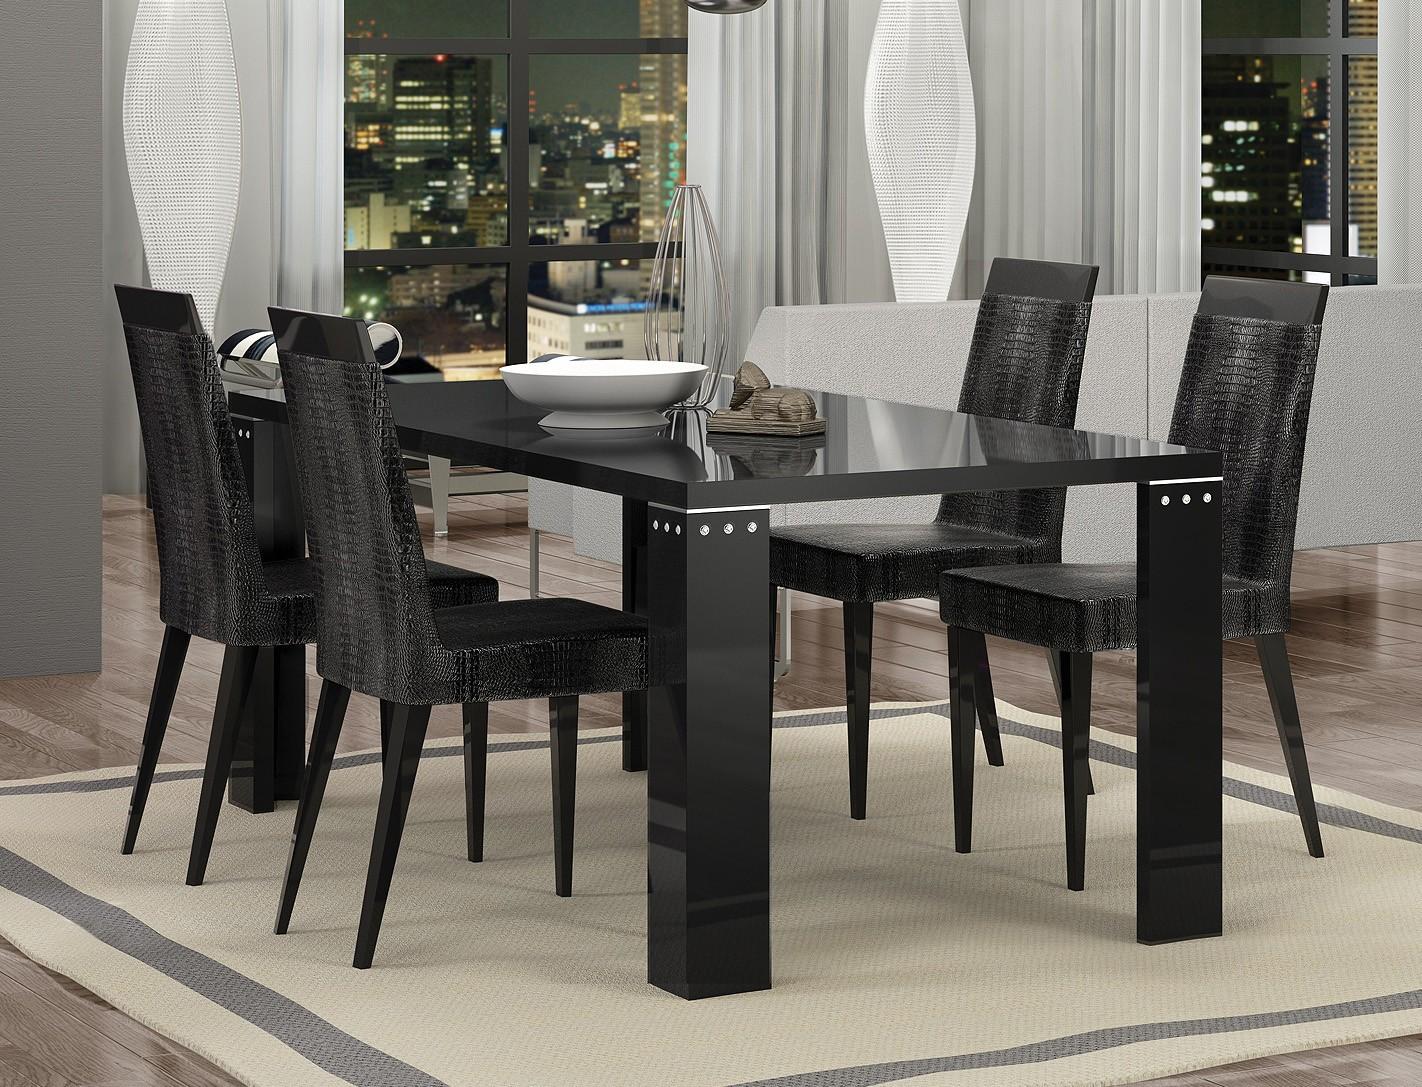 

    
At Home USA Armonia Diamond Black Lacquered Luxury Dining Table Contemporary
